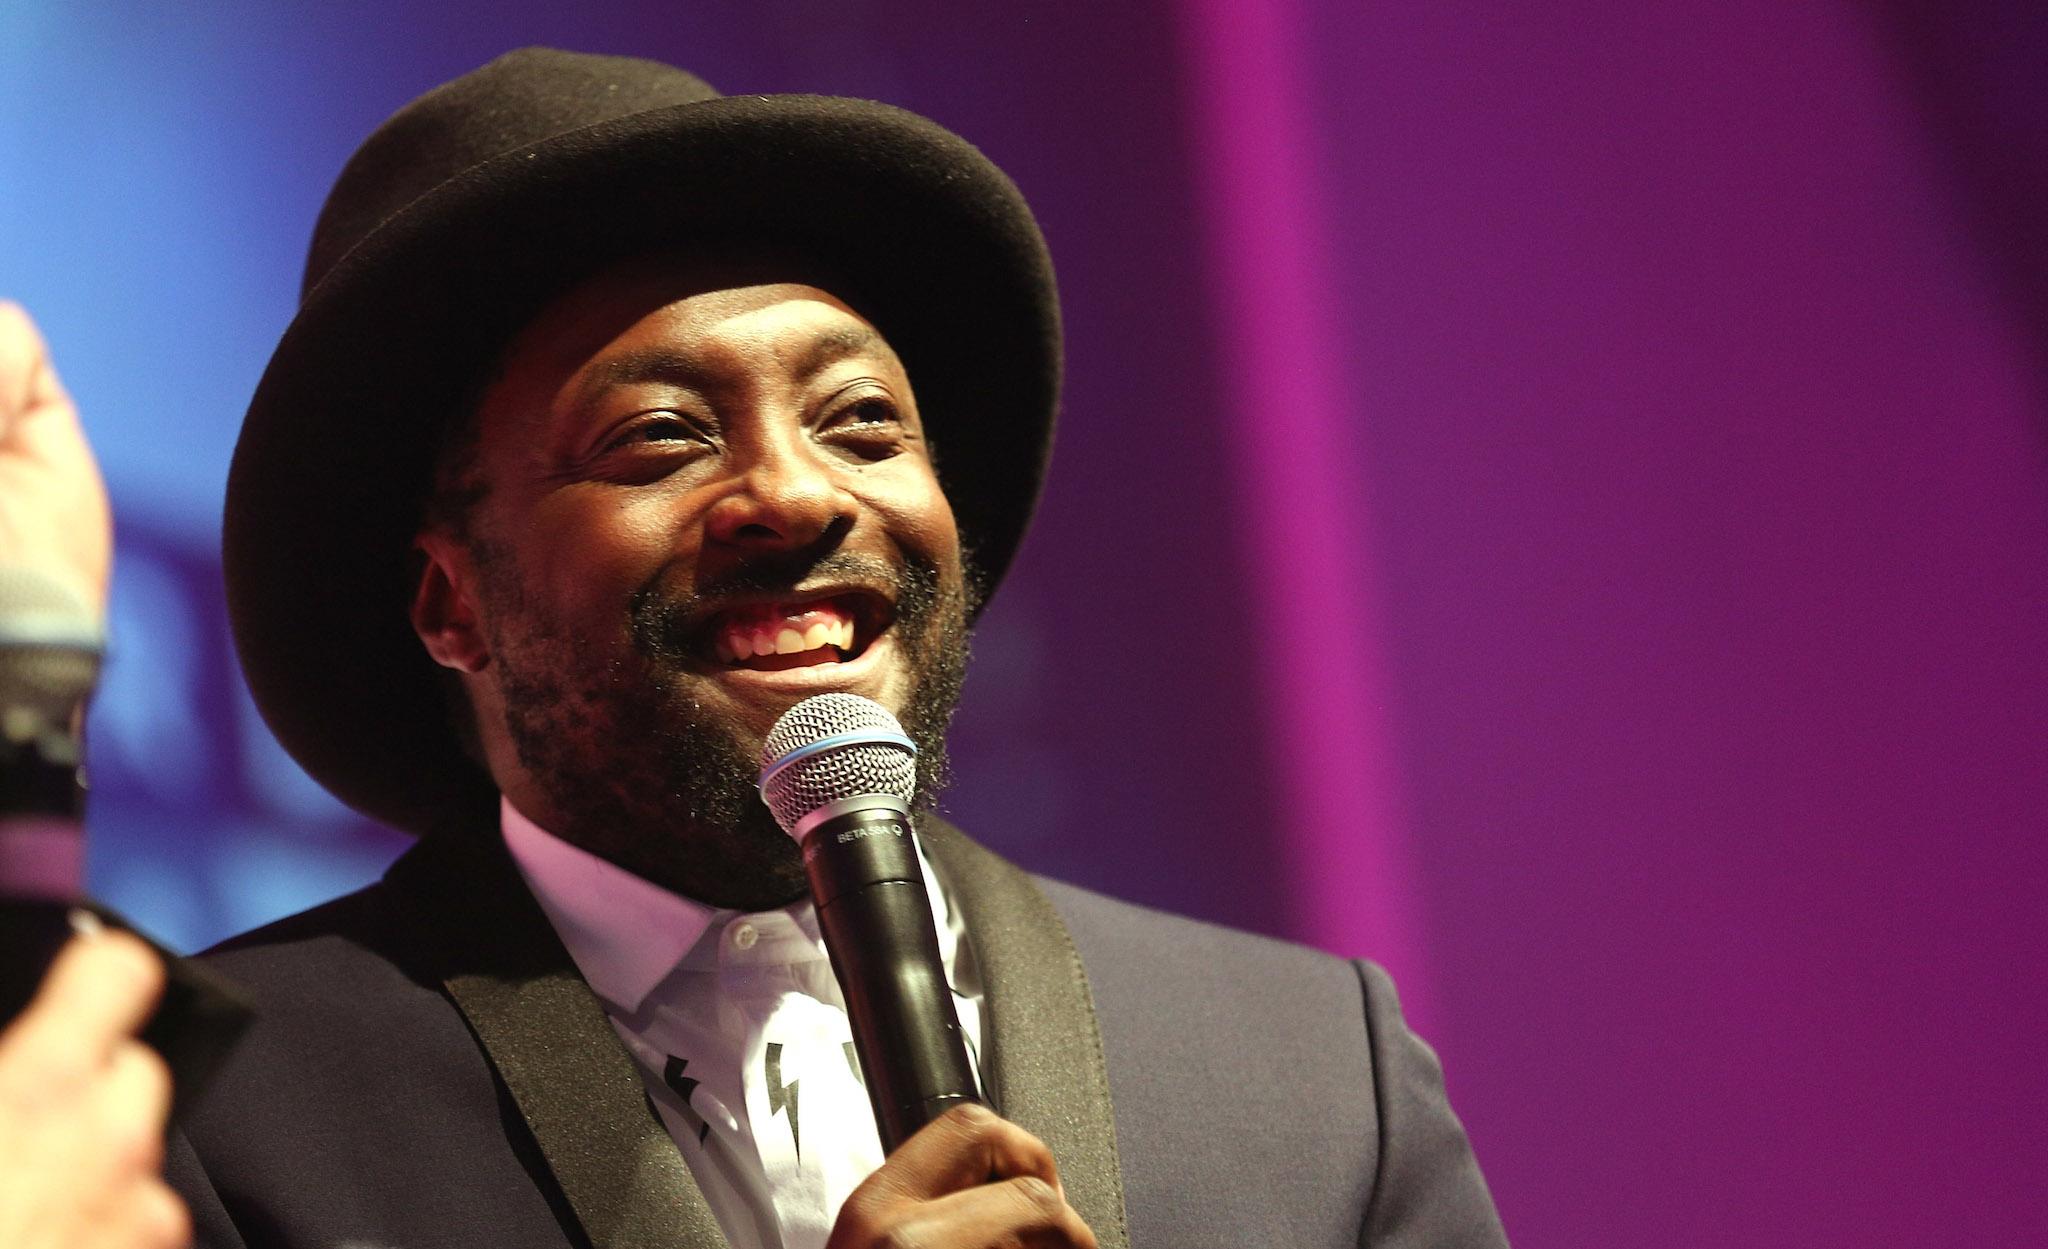 will.i.am takes part in an interview on stage as he wins the Tech Personality of the Year Award at the T3 Gadget Awards 2016